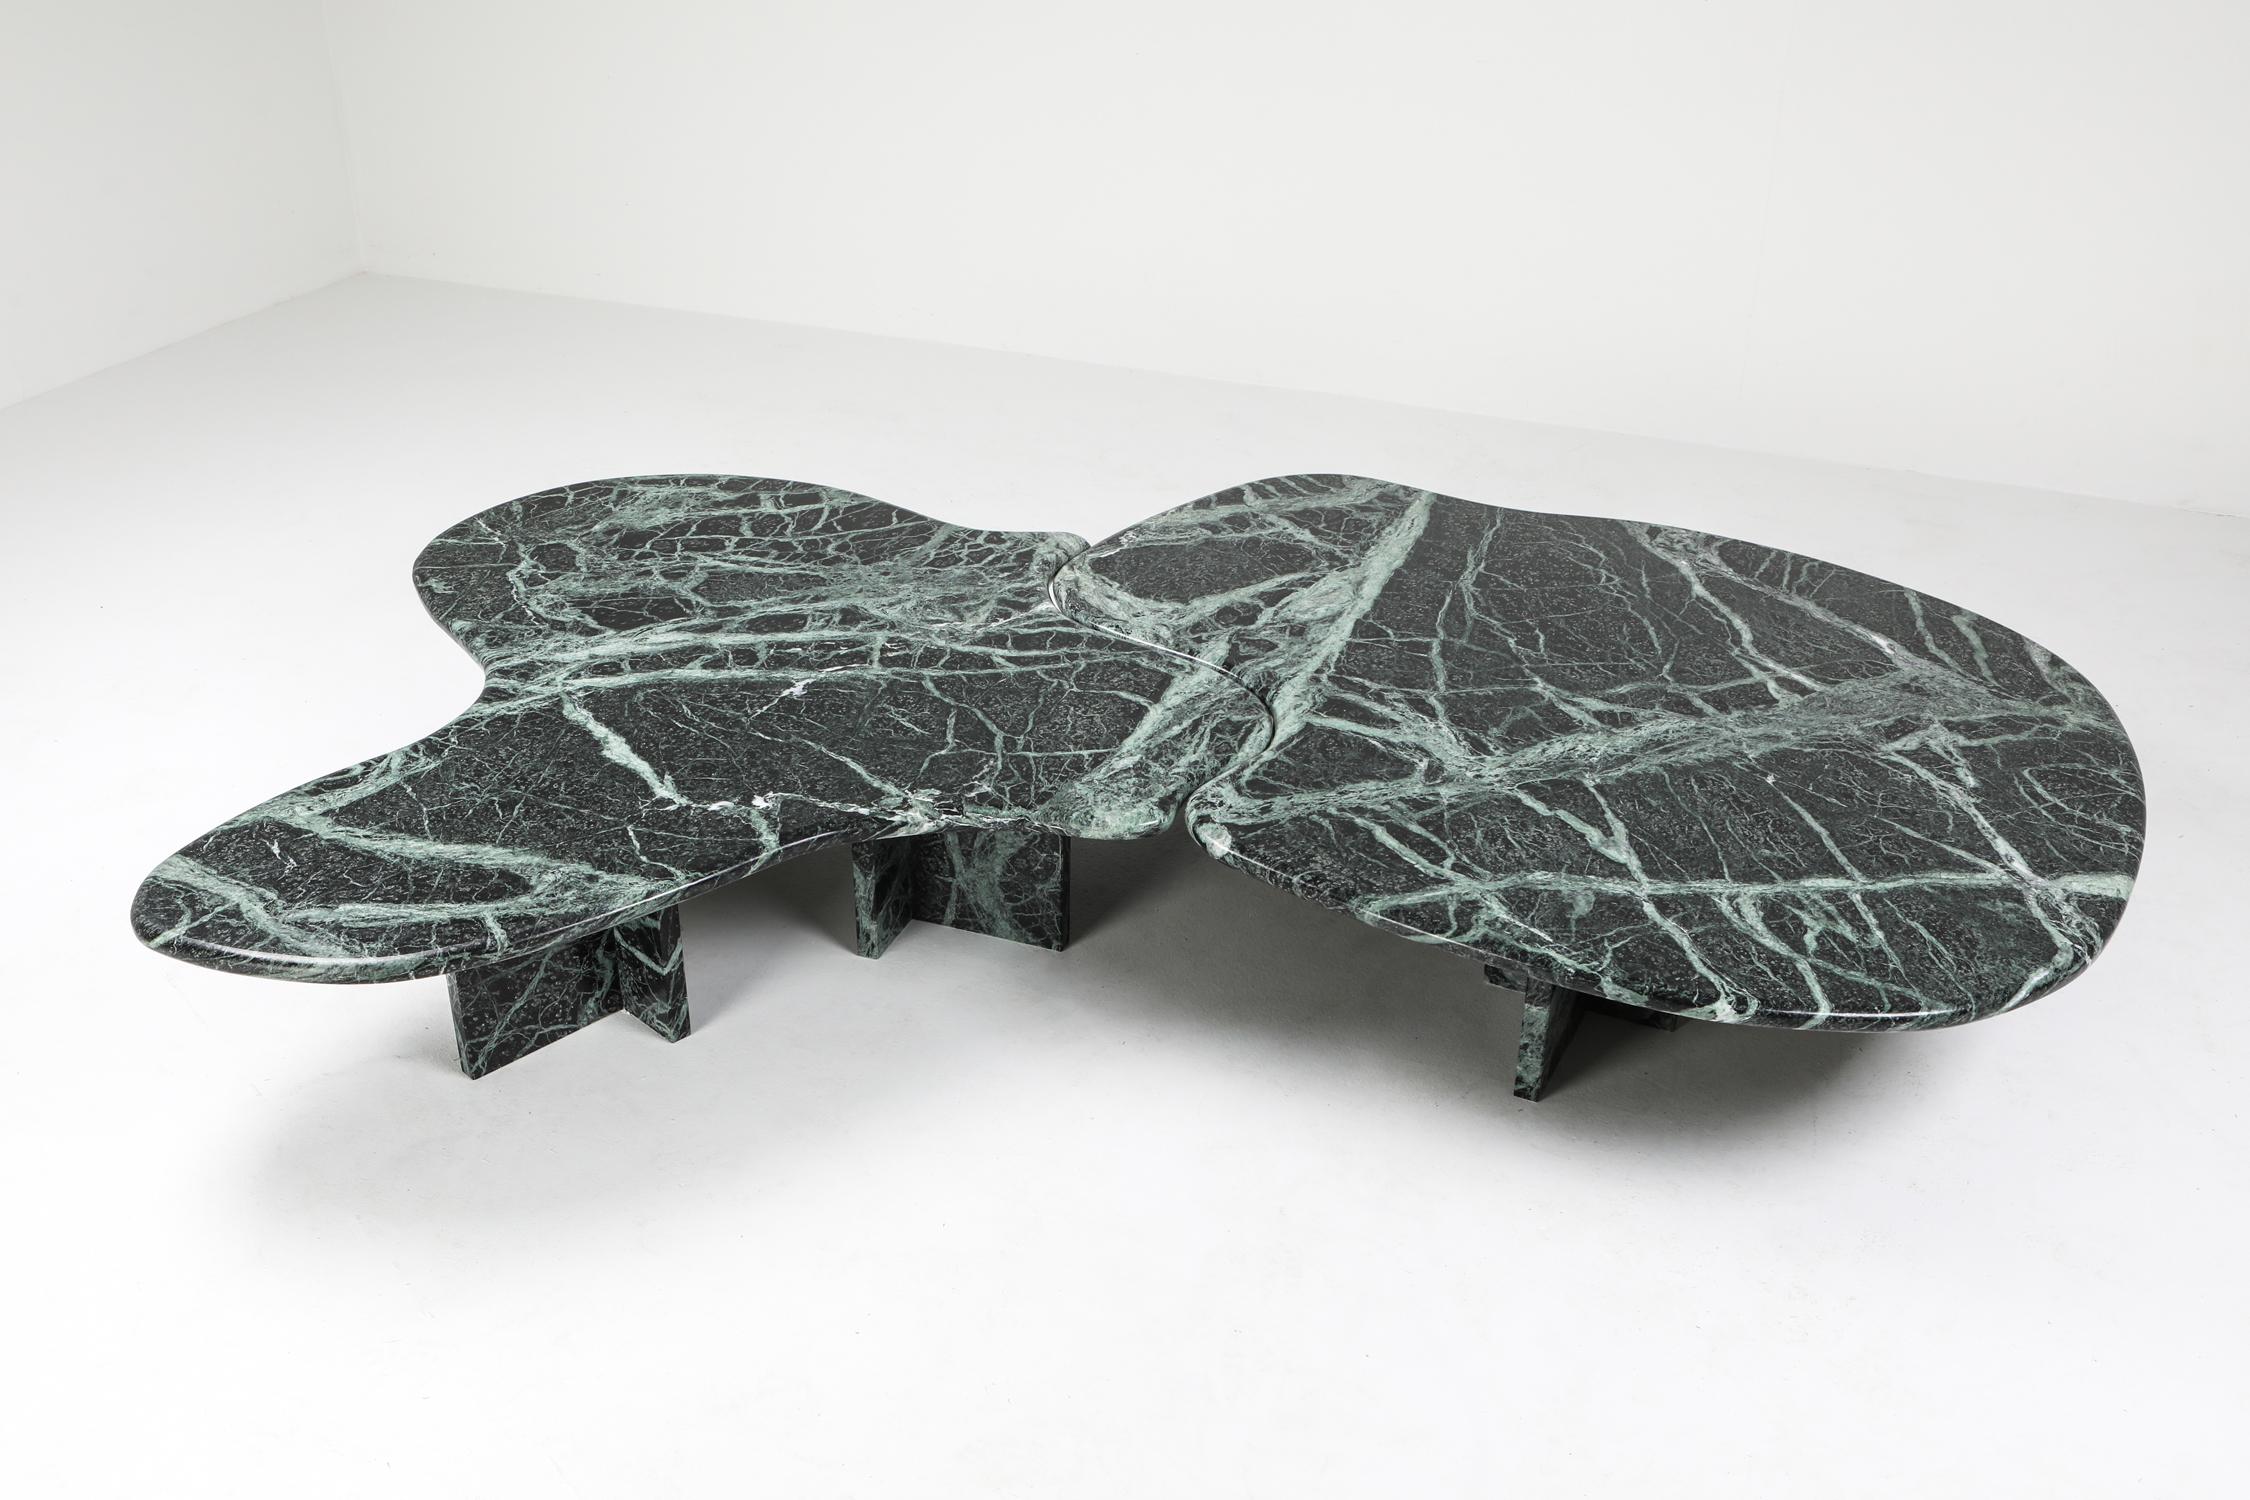 Late 1970s pair of coffee tables in green marble which belong together like yin and yang.
Feels like a collab between Angelo Mangiarotti and Isamu Noguchi.
True spectacular piece that we've never encountered before.
Fits well in a Minimalist home